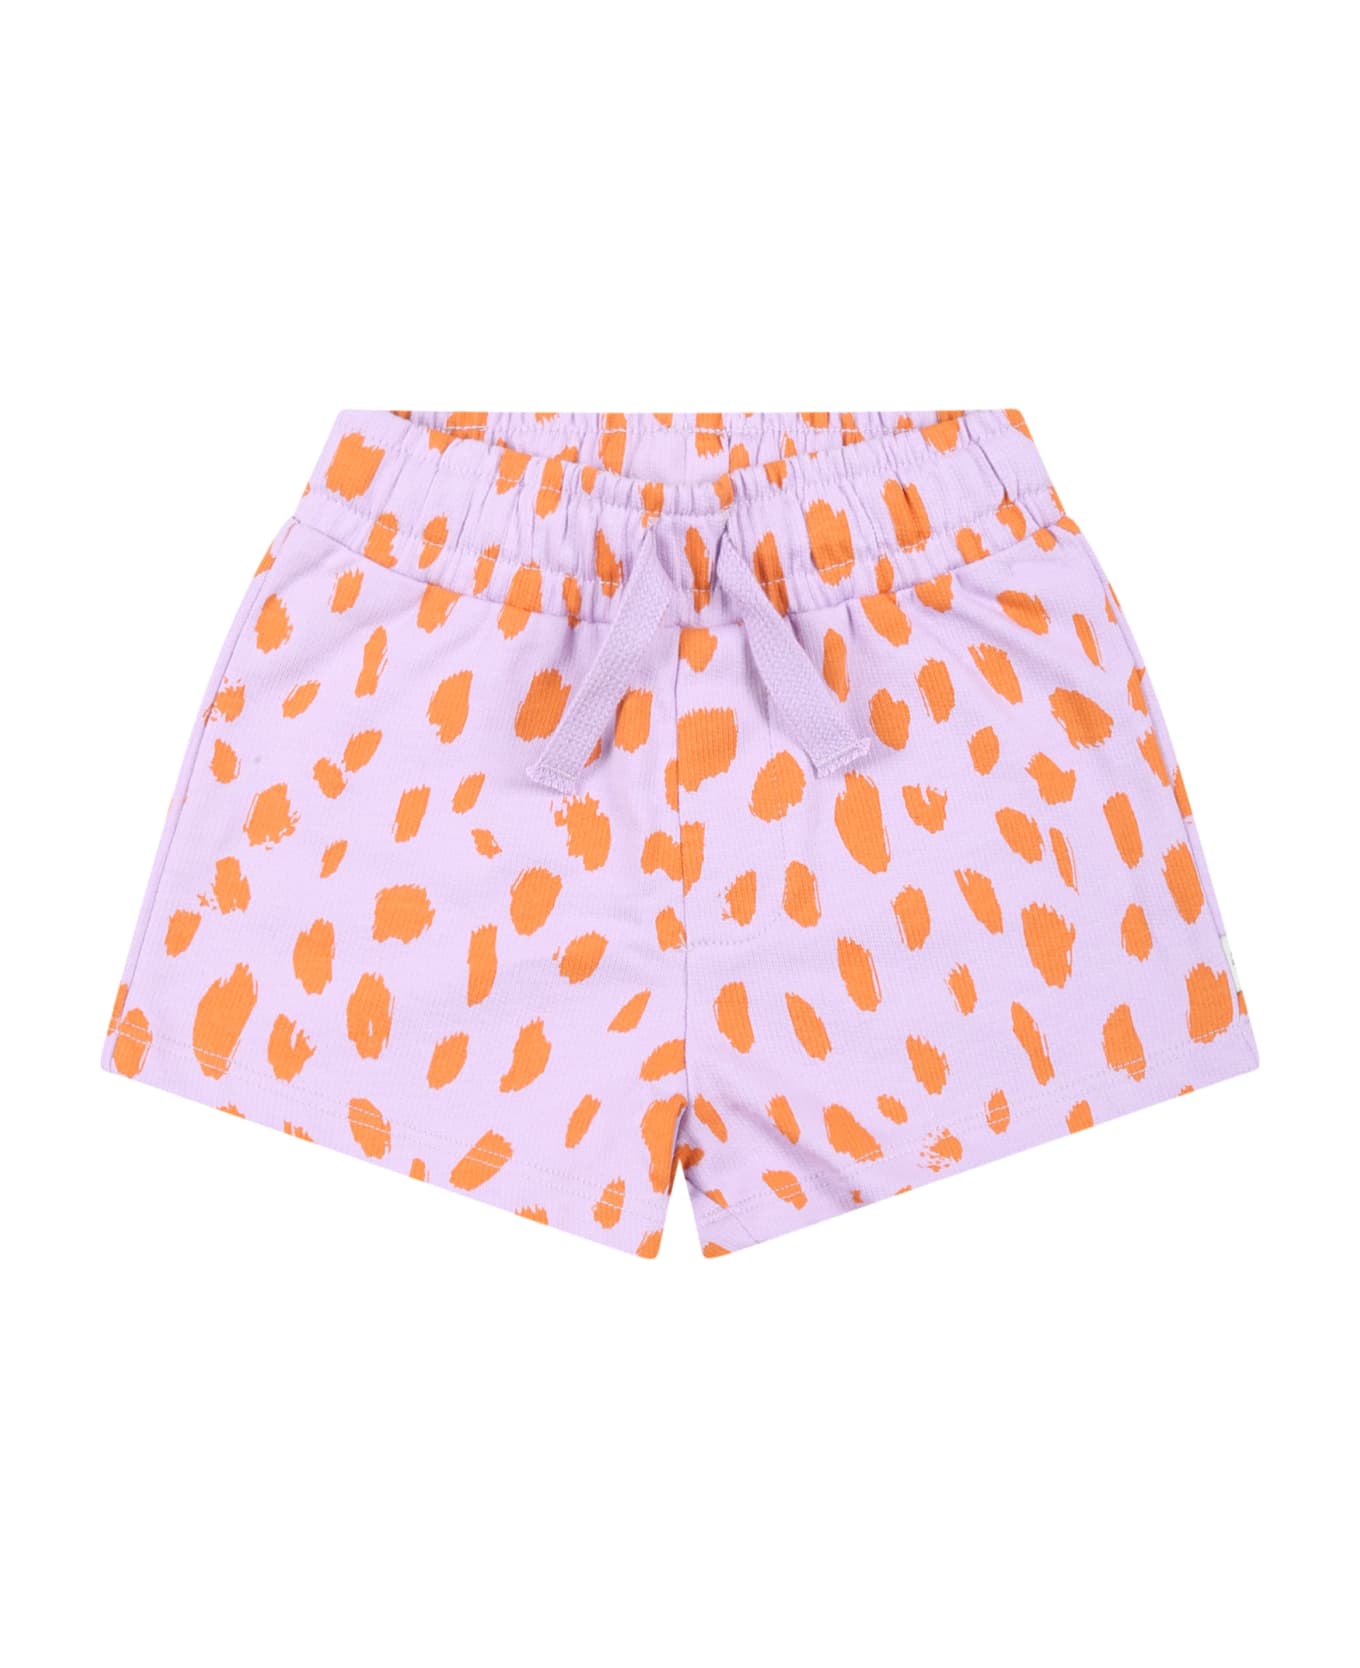 Stella McCartney Kids Purple Shorts For Baby Girl With Animal Print - Violet